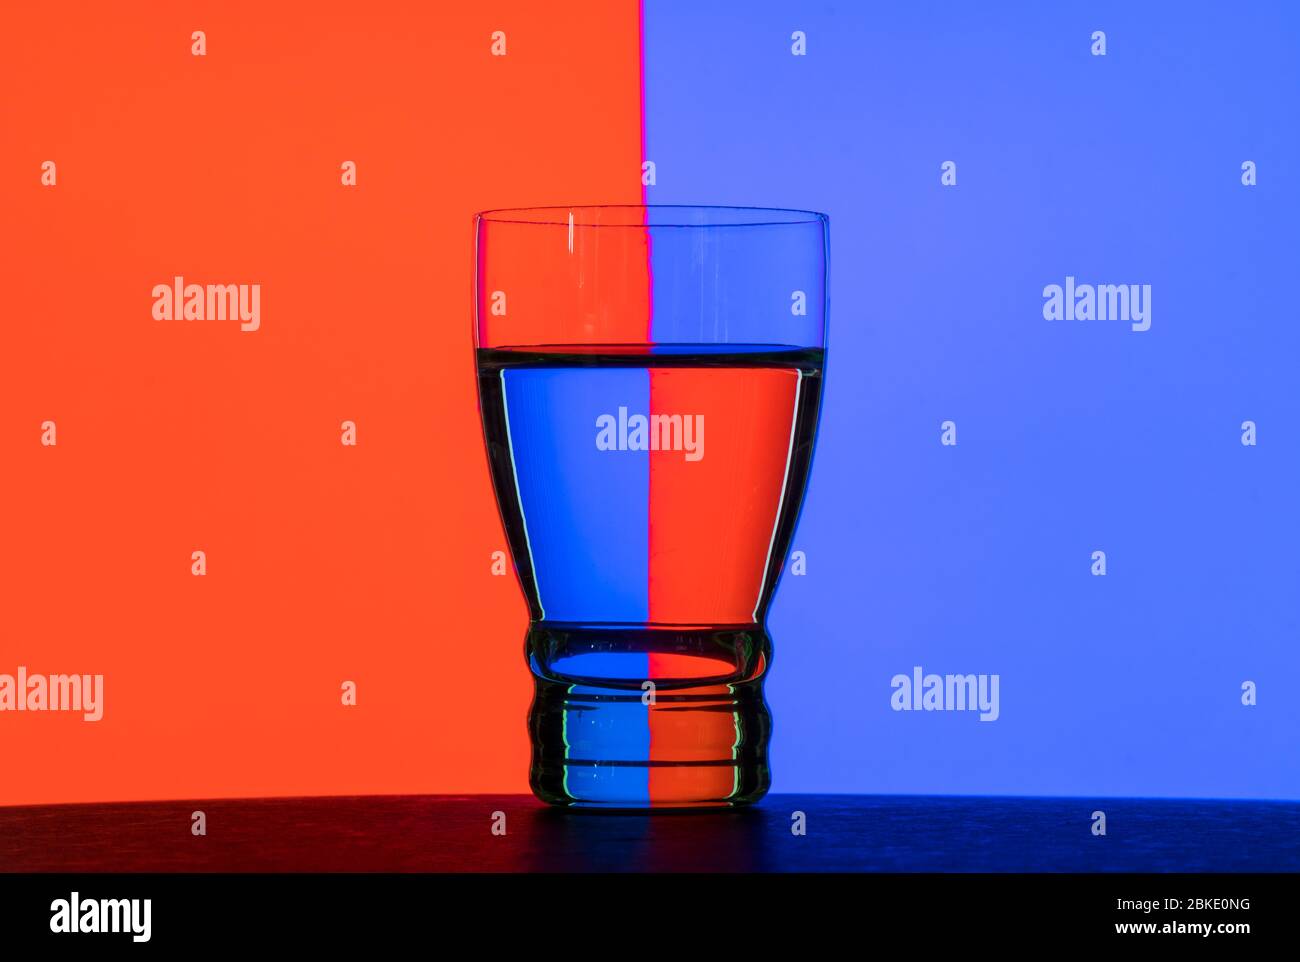 https://c8.alamy.com/comp/2BKE0NG/glass-of-water-against-a-two-color-background-water-in-refracting-light-still-life-2BKE0NG.jpg